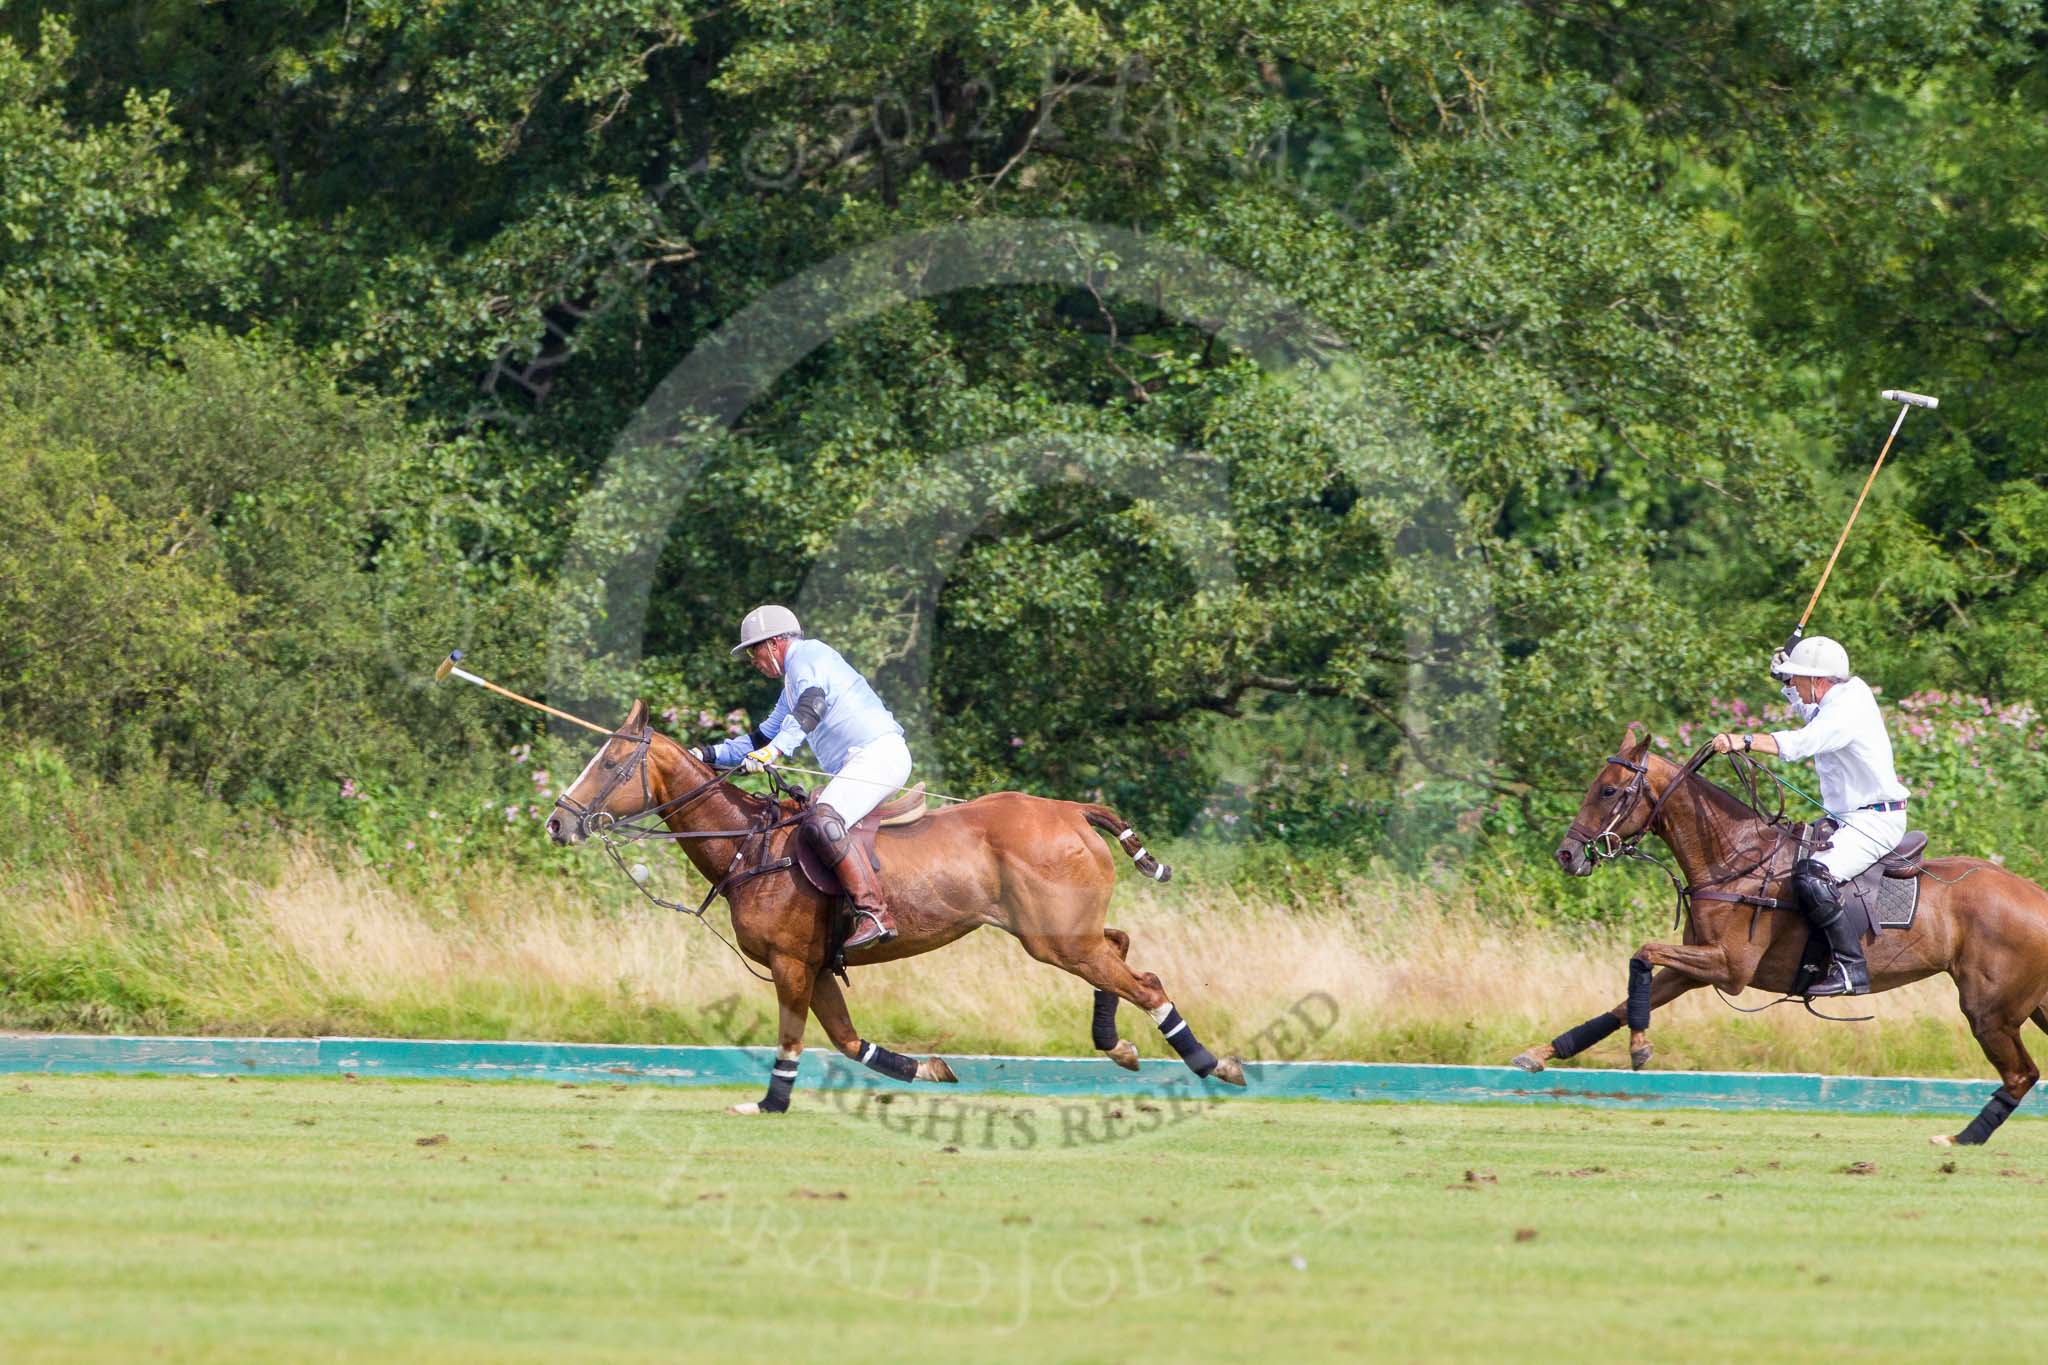 7th Heritage Polo Cup semi-finals: Mariano Darritchon braking away followed by Paul Oberschneider..
Hurtwood Park Polo Club,
Ewhurst Green,
Surrey,
United Kingdom,
on 04 August 2012 at 16:17, image #324